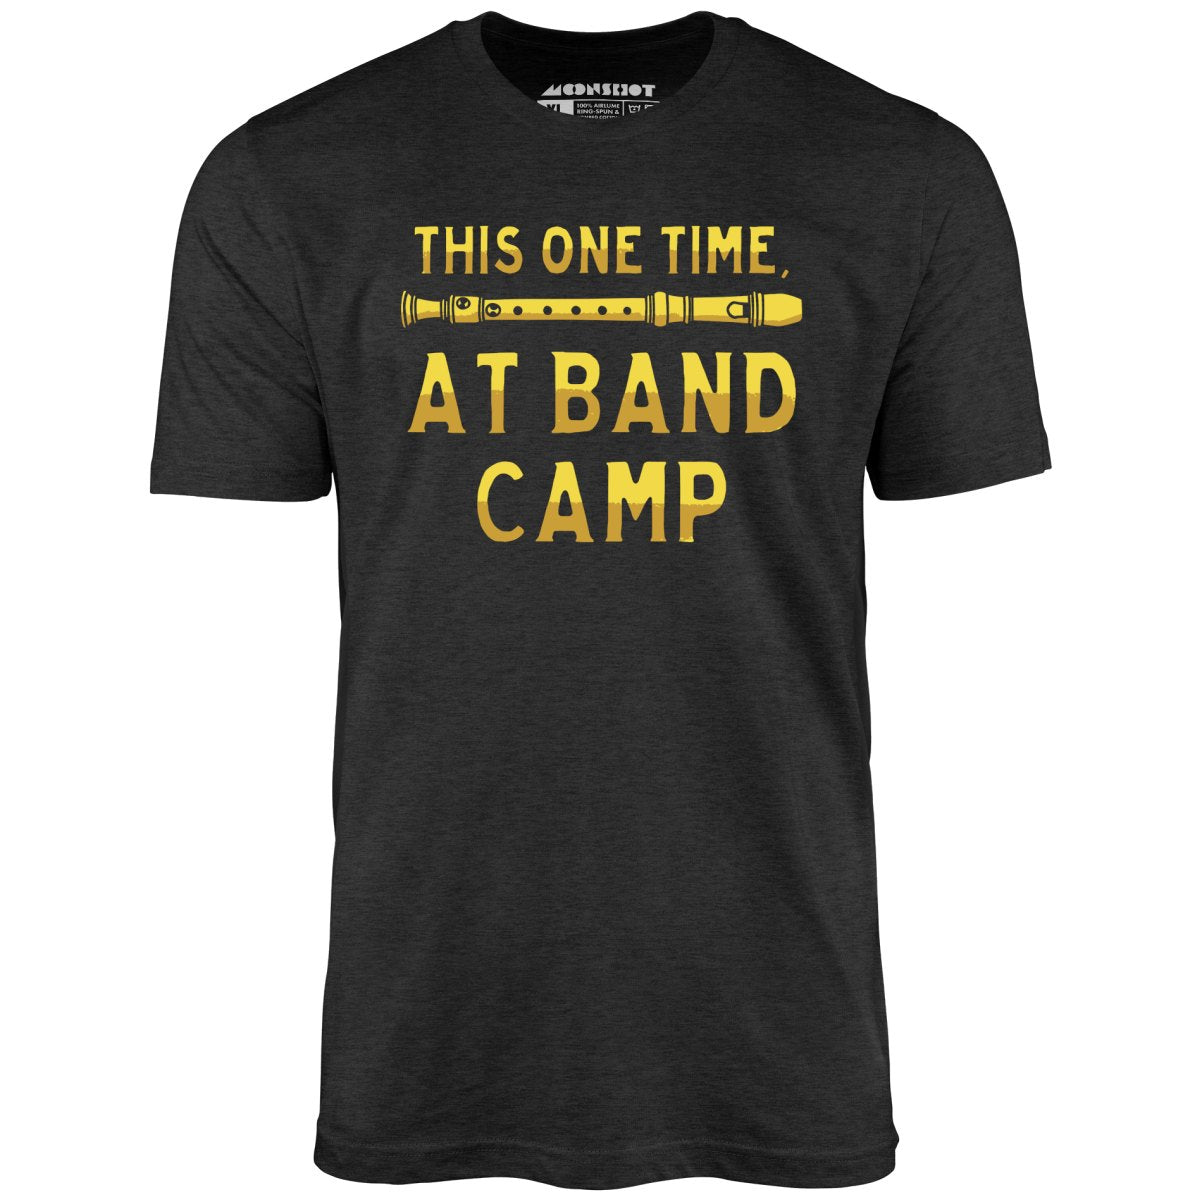 This One Time, at Band Camp - Unisex T-Shirt